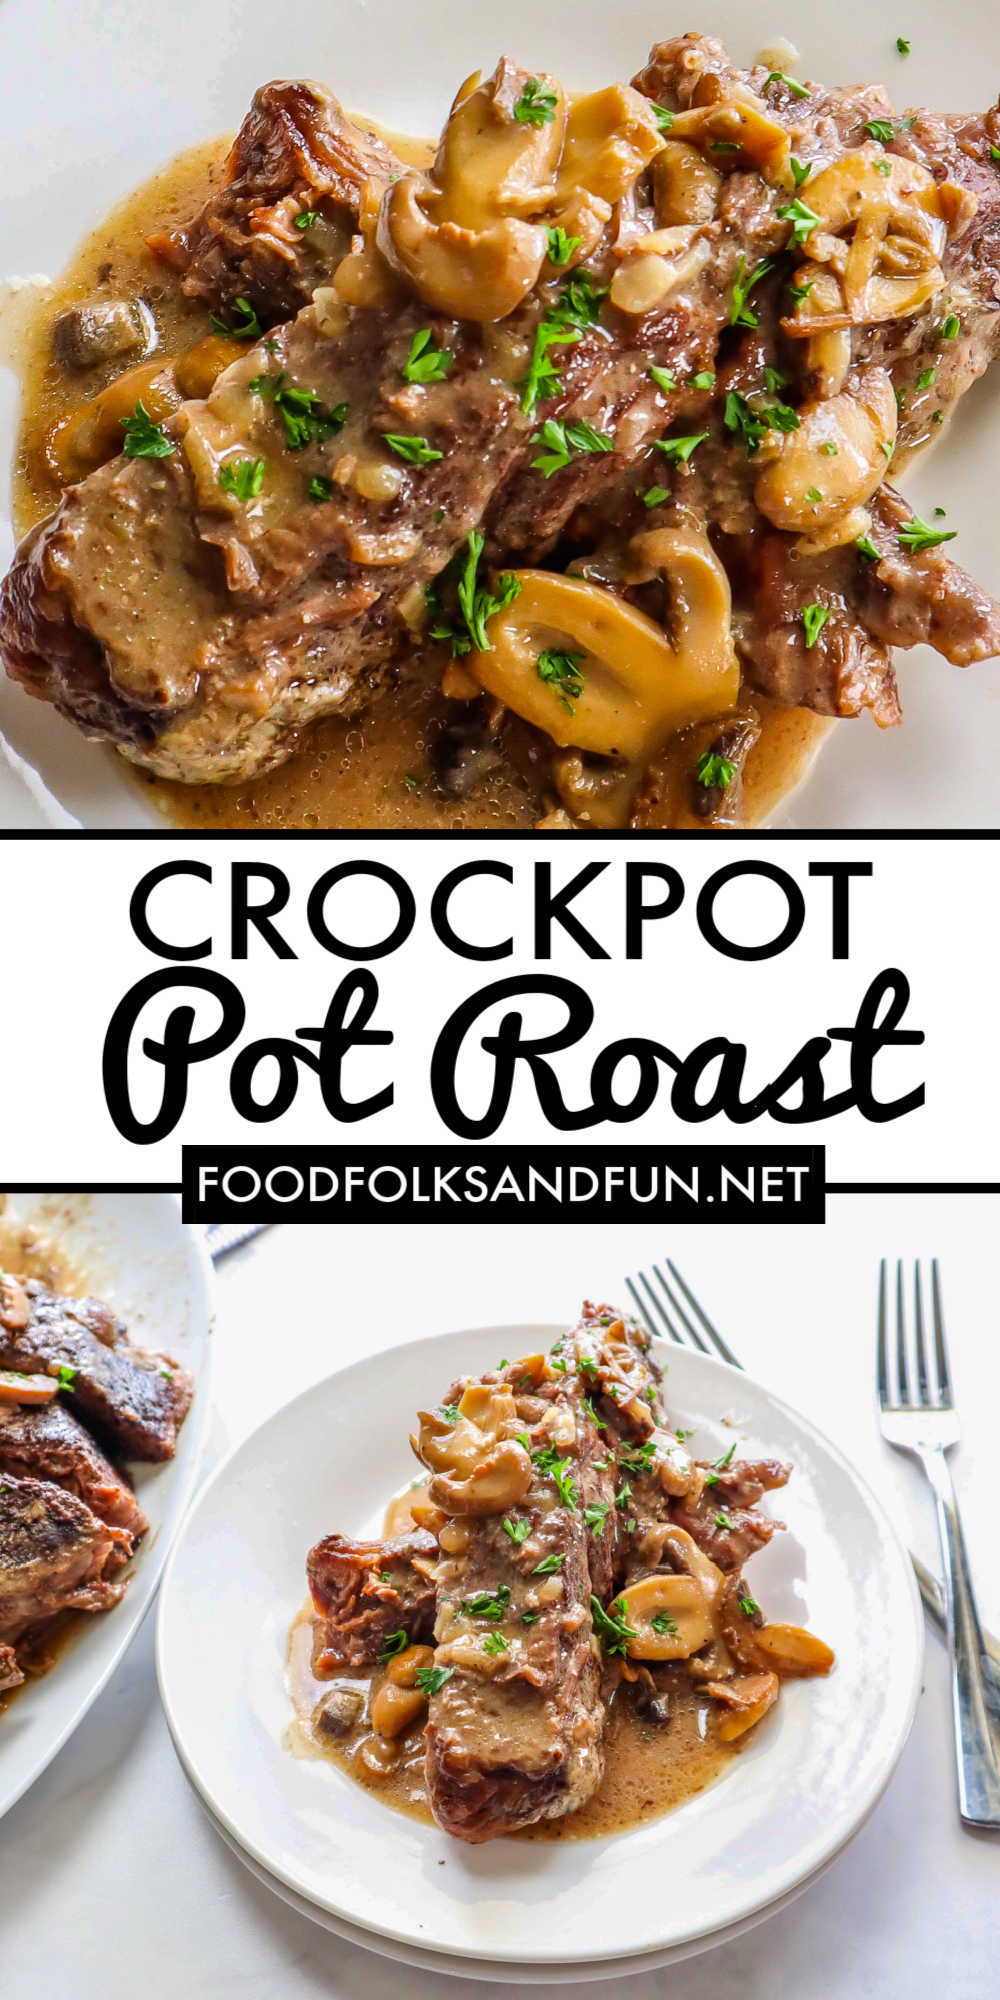 This Crockpot Pot Roast with Mushrooms recipe is super moist and tender. It’s served with a delicious brown gravy made mushrooms, cream of mushroom soup, and onion soup mix. via @foodfolksandfun